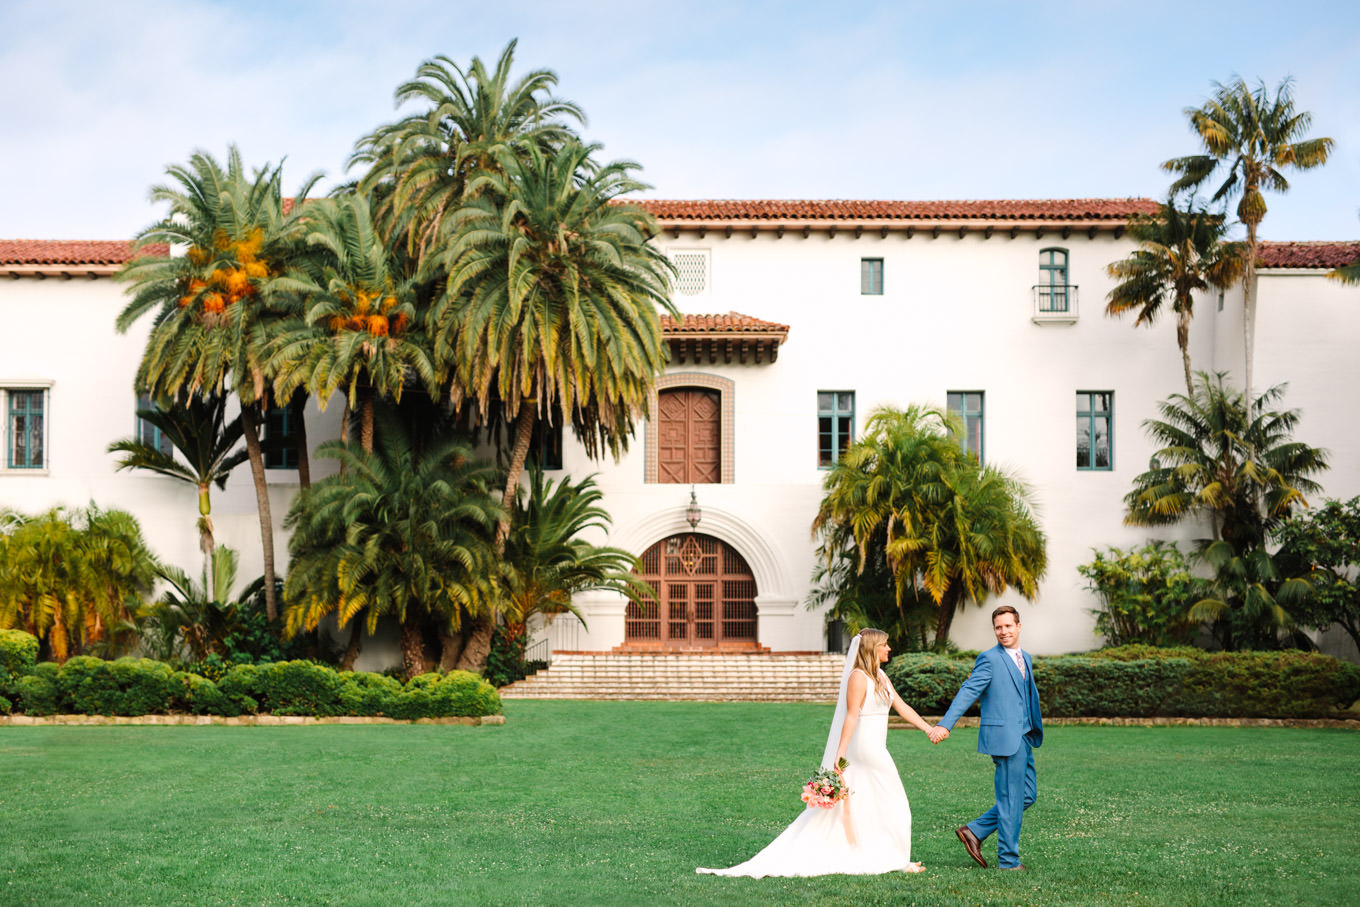 Santa Barbara Courthouse elopement | Engagement, elopement, and wedding photography roundup of Mary Costa’s favorite images from 2020 | Colorful and elevated photography for fun-loving couples in Southern California | #2020wedding #elopement #weddingphoto #weddingphotography   Source: Mary Costa Photography | Los Angeles